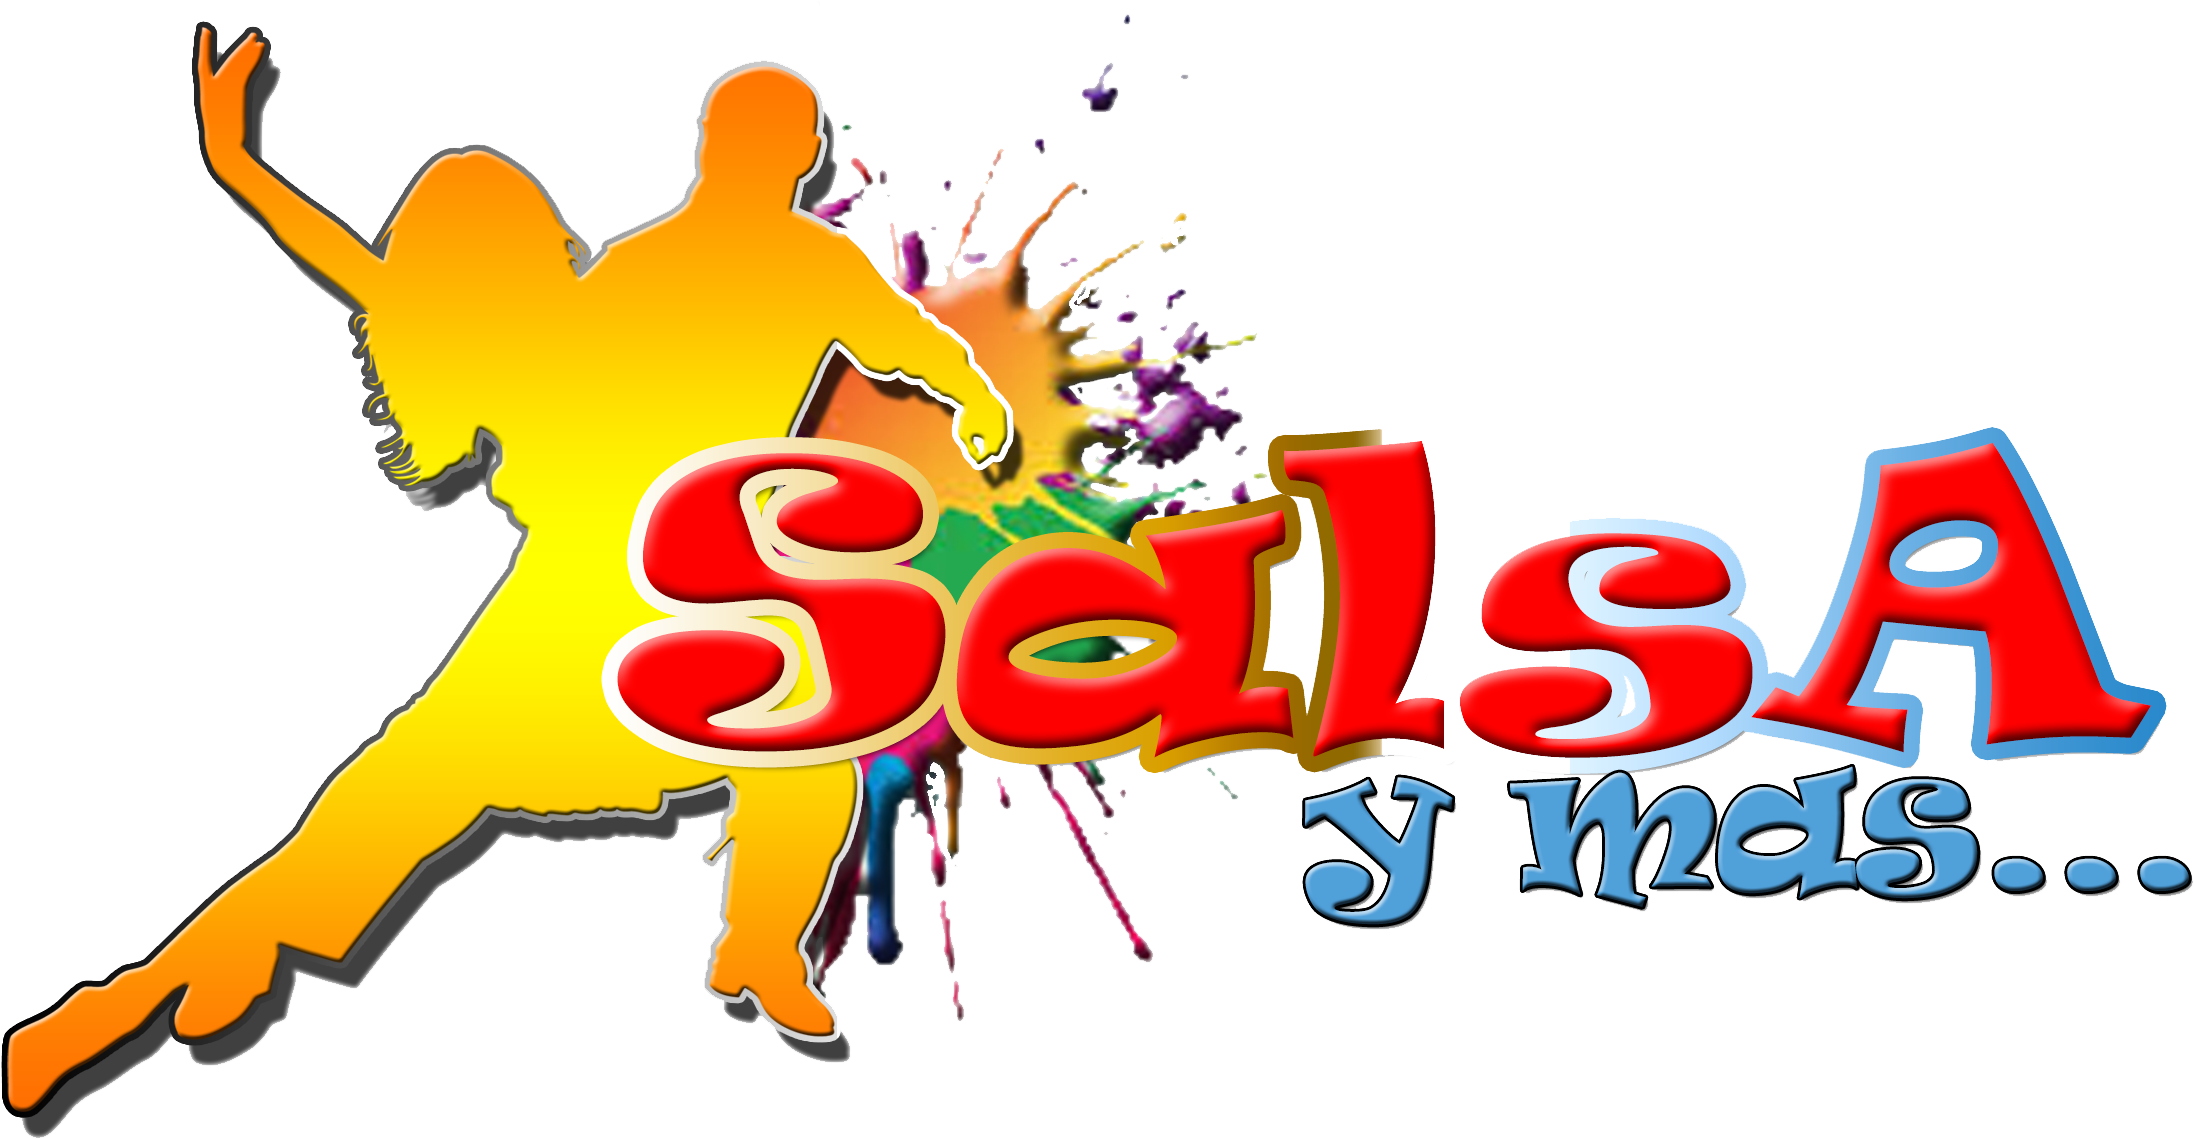 A Colorful Logo With A Man Dancing